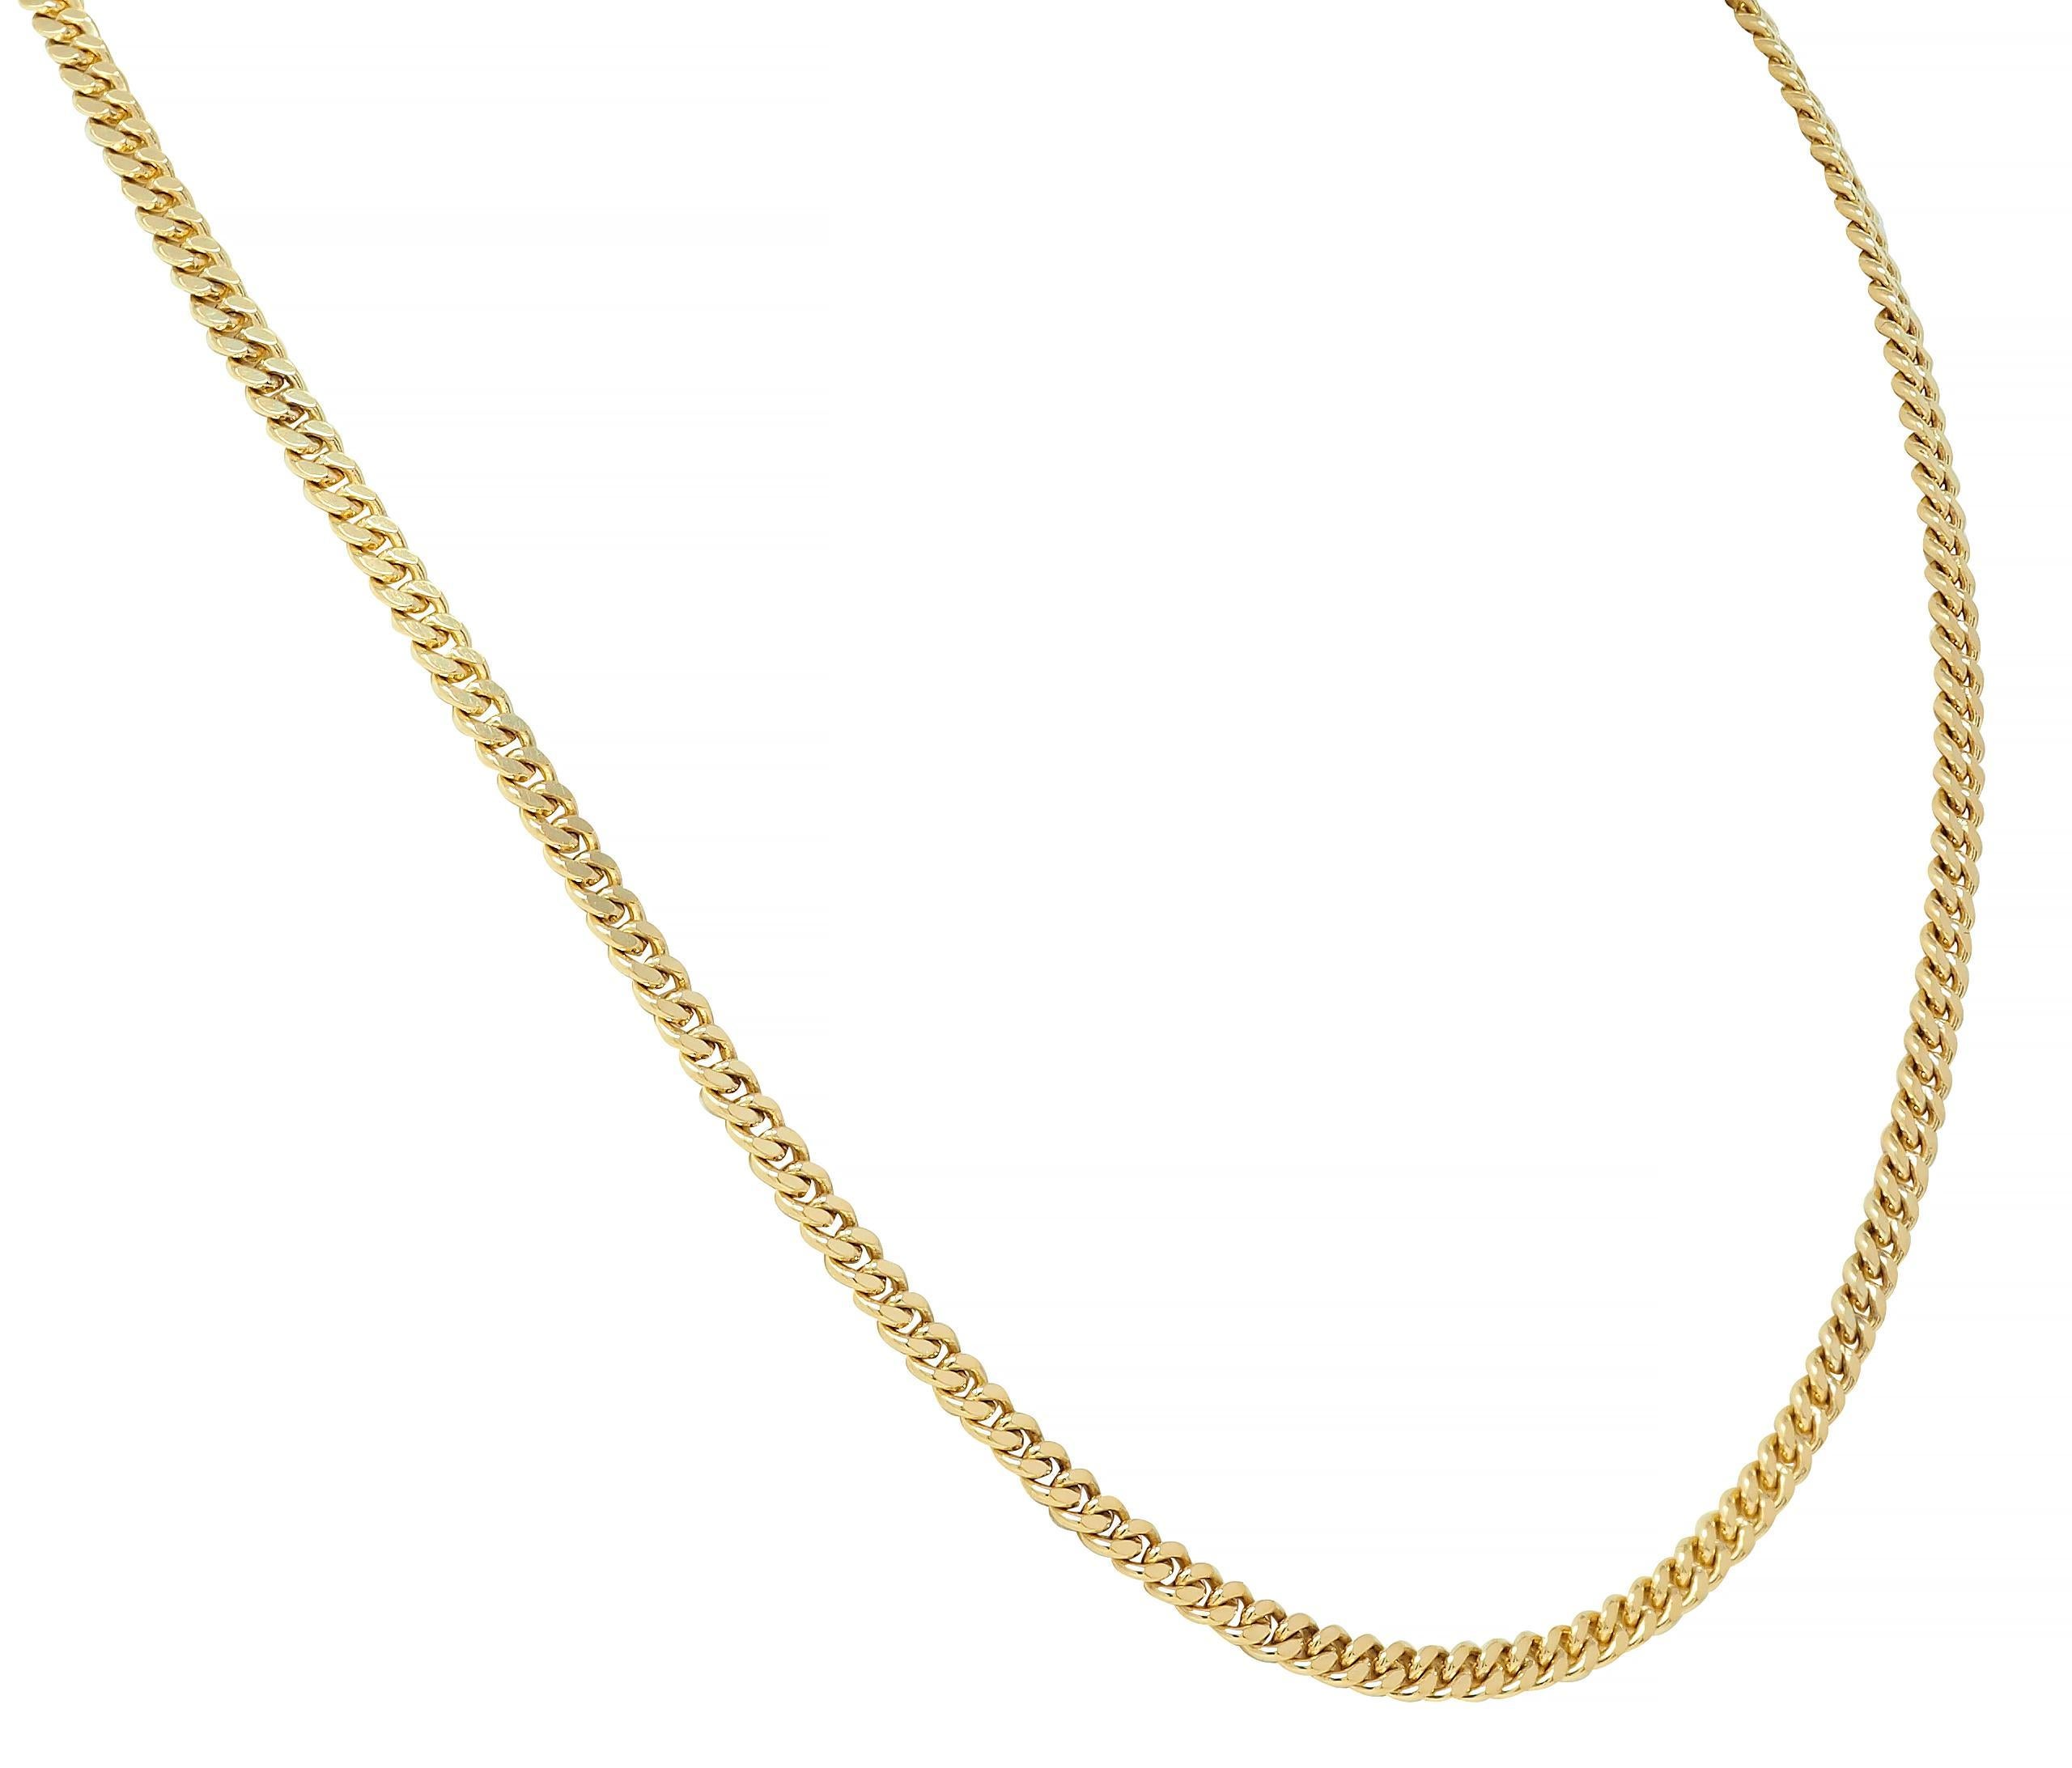 Women's or Men's Vintage 18 Karat Yellow Gold Curb Link Chain Necklace For Sale